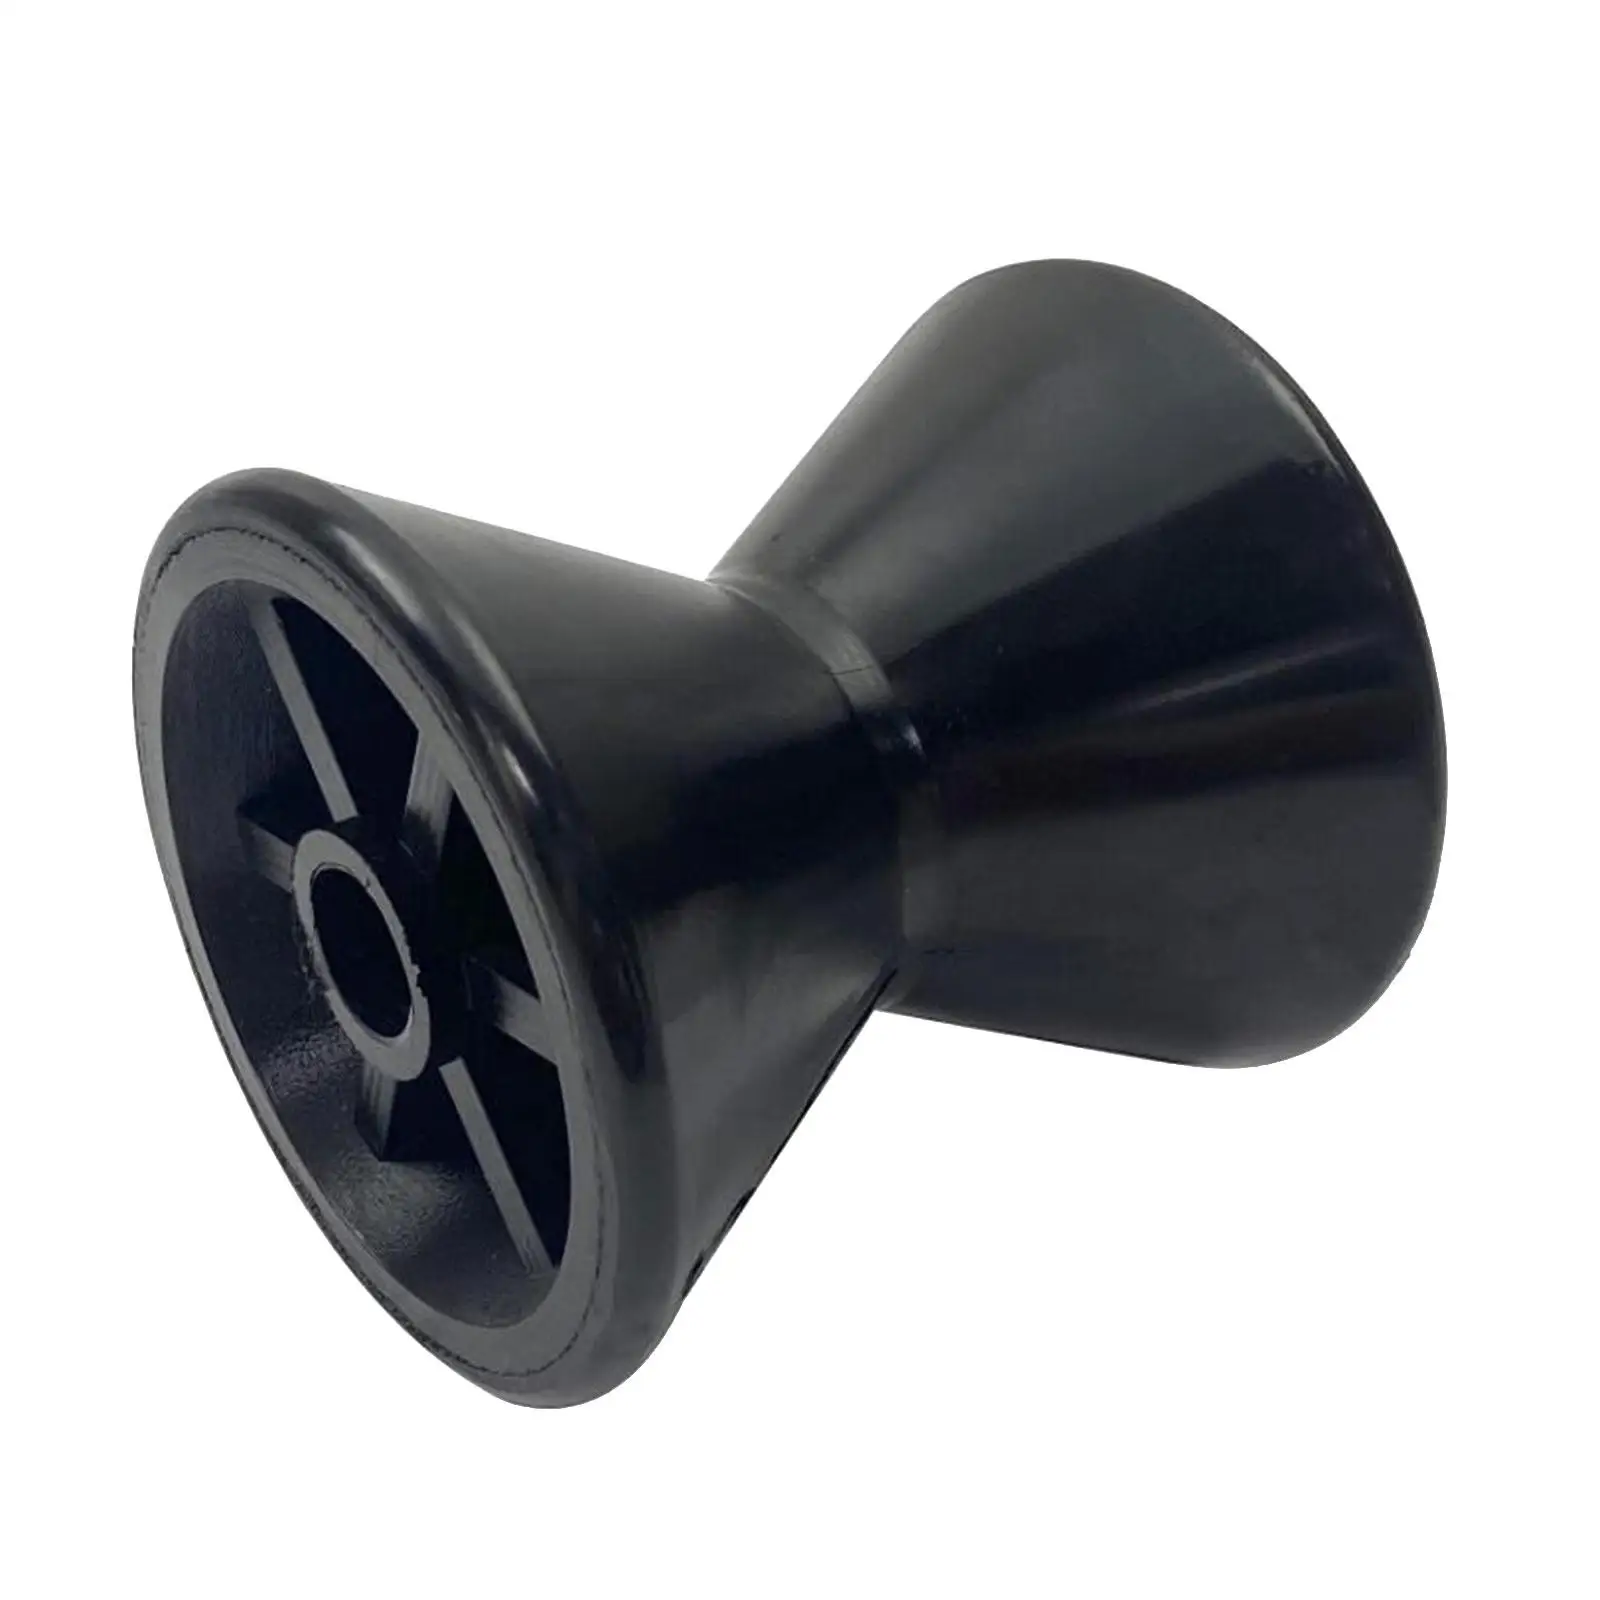 Bow Roller 3.5 inch Professional Fittings Direct Replaces Rubber Bow Roller